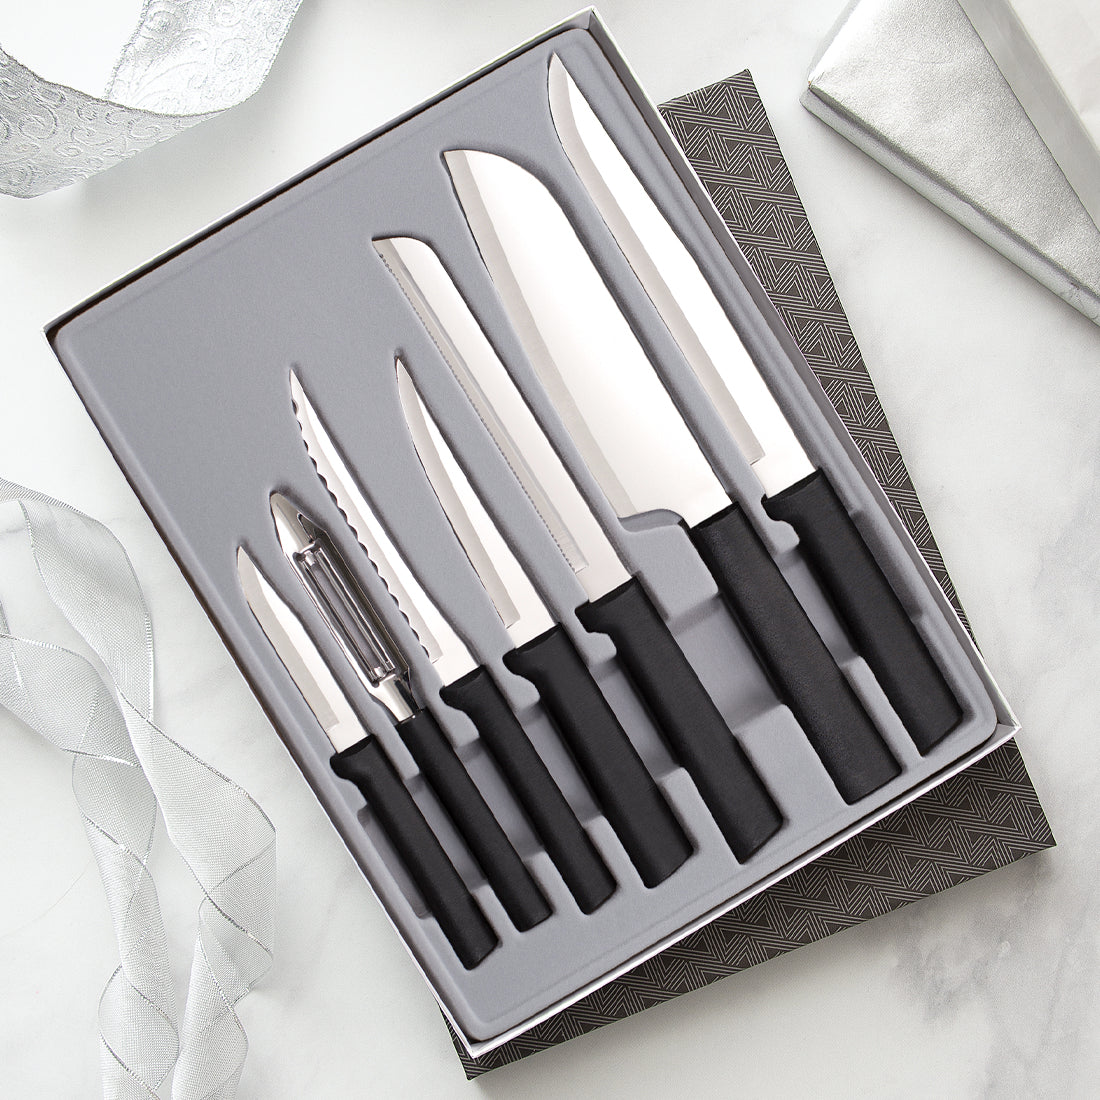 Rada Cutlery The Starter Gift Set with silver handles in a black-lined gift box.